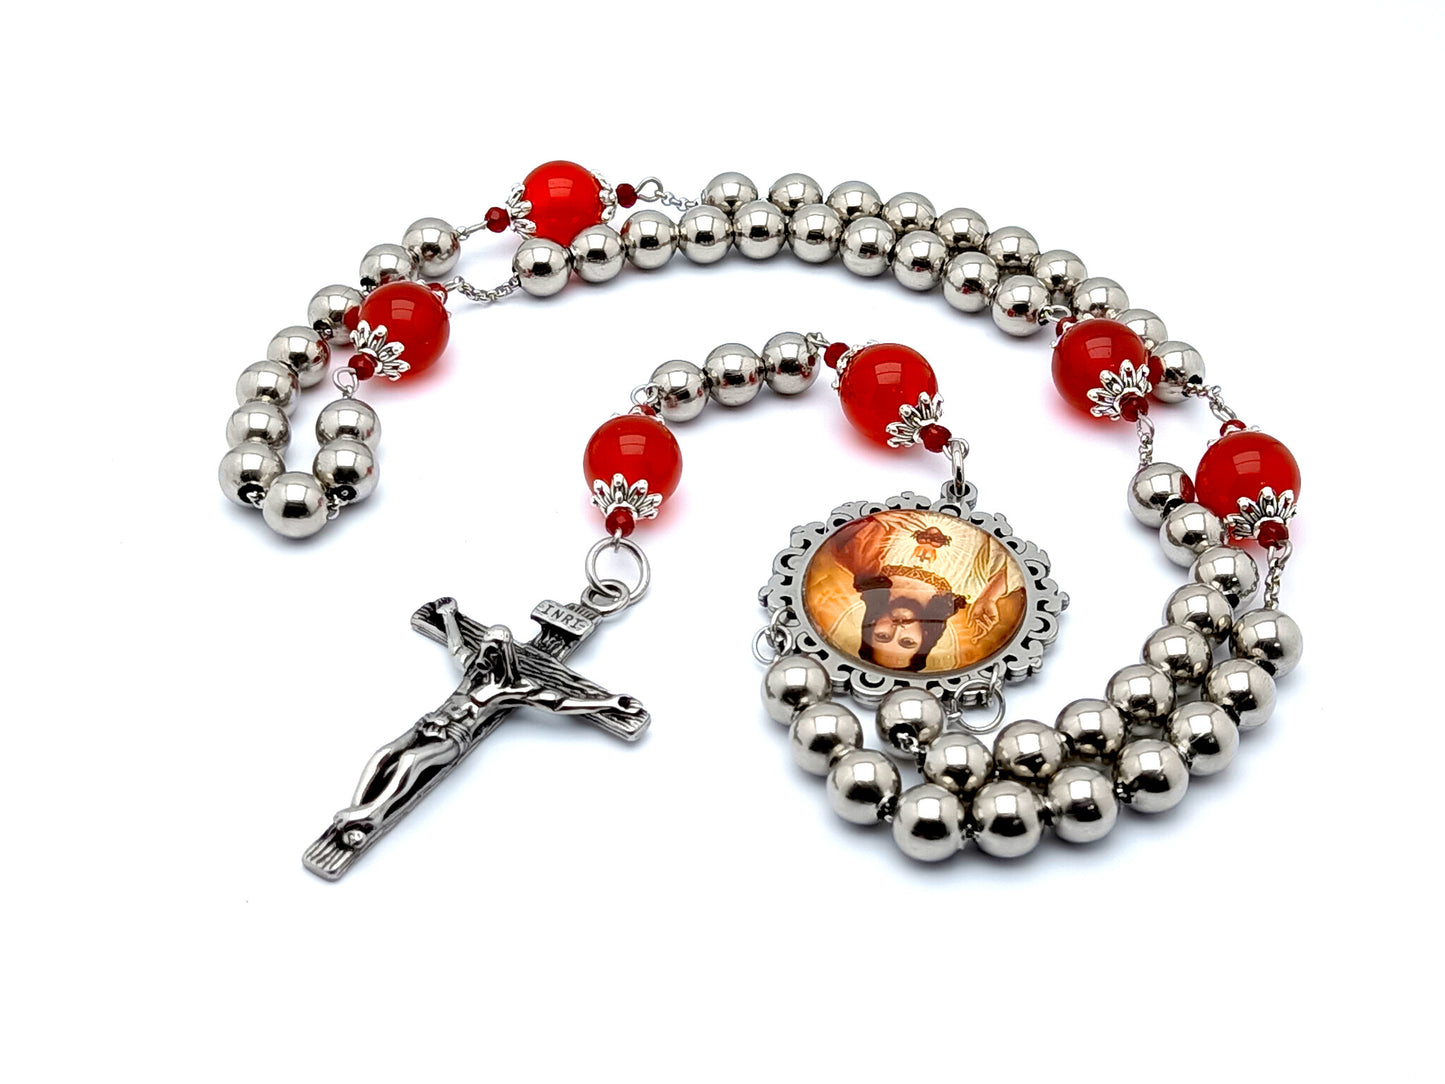 Sacred Heart unique rosary beads with stainless steel and ruby gemstone beads and stainless steel crucifix.